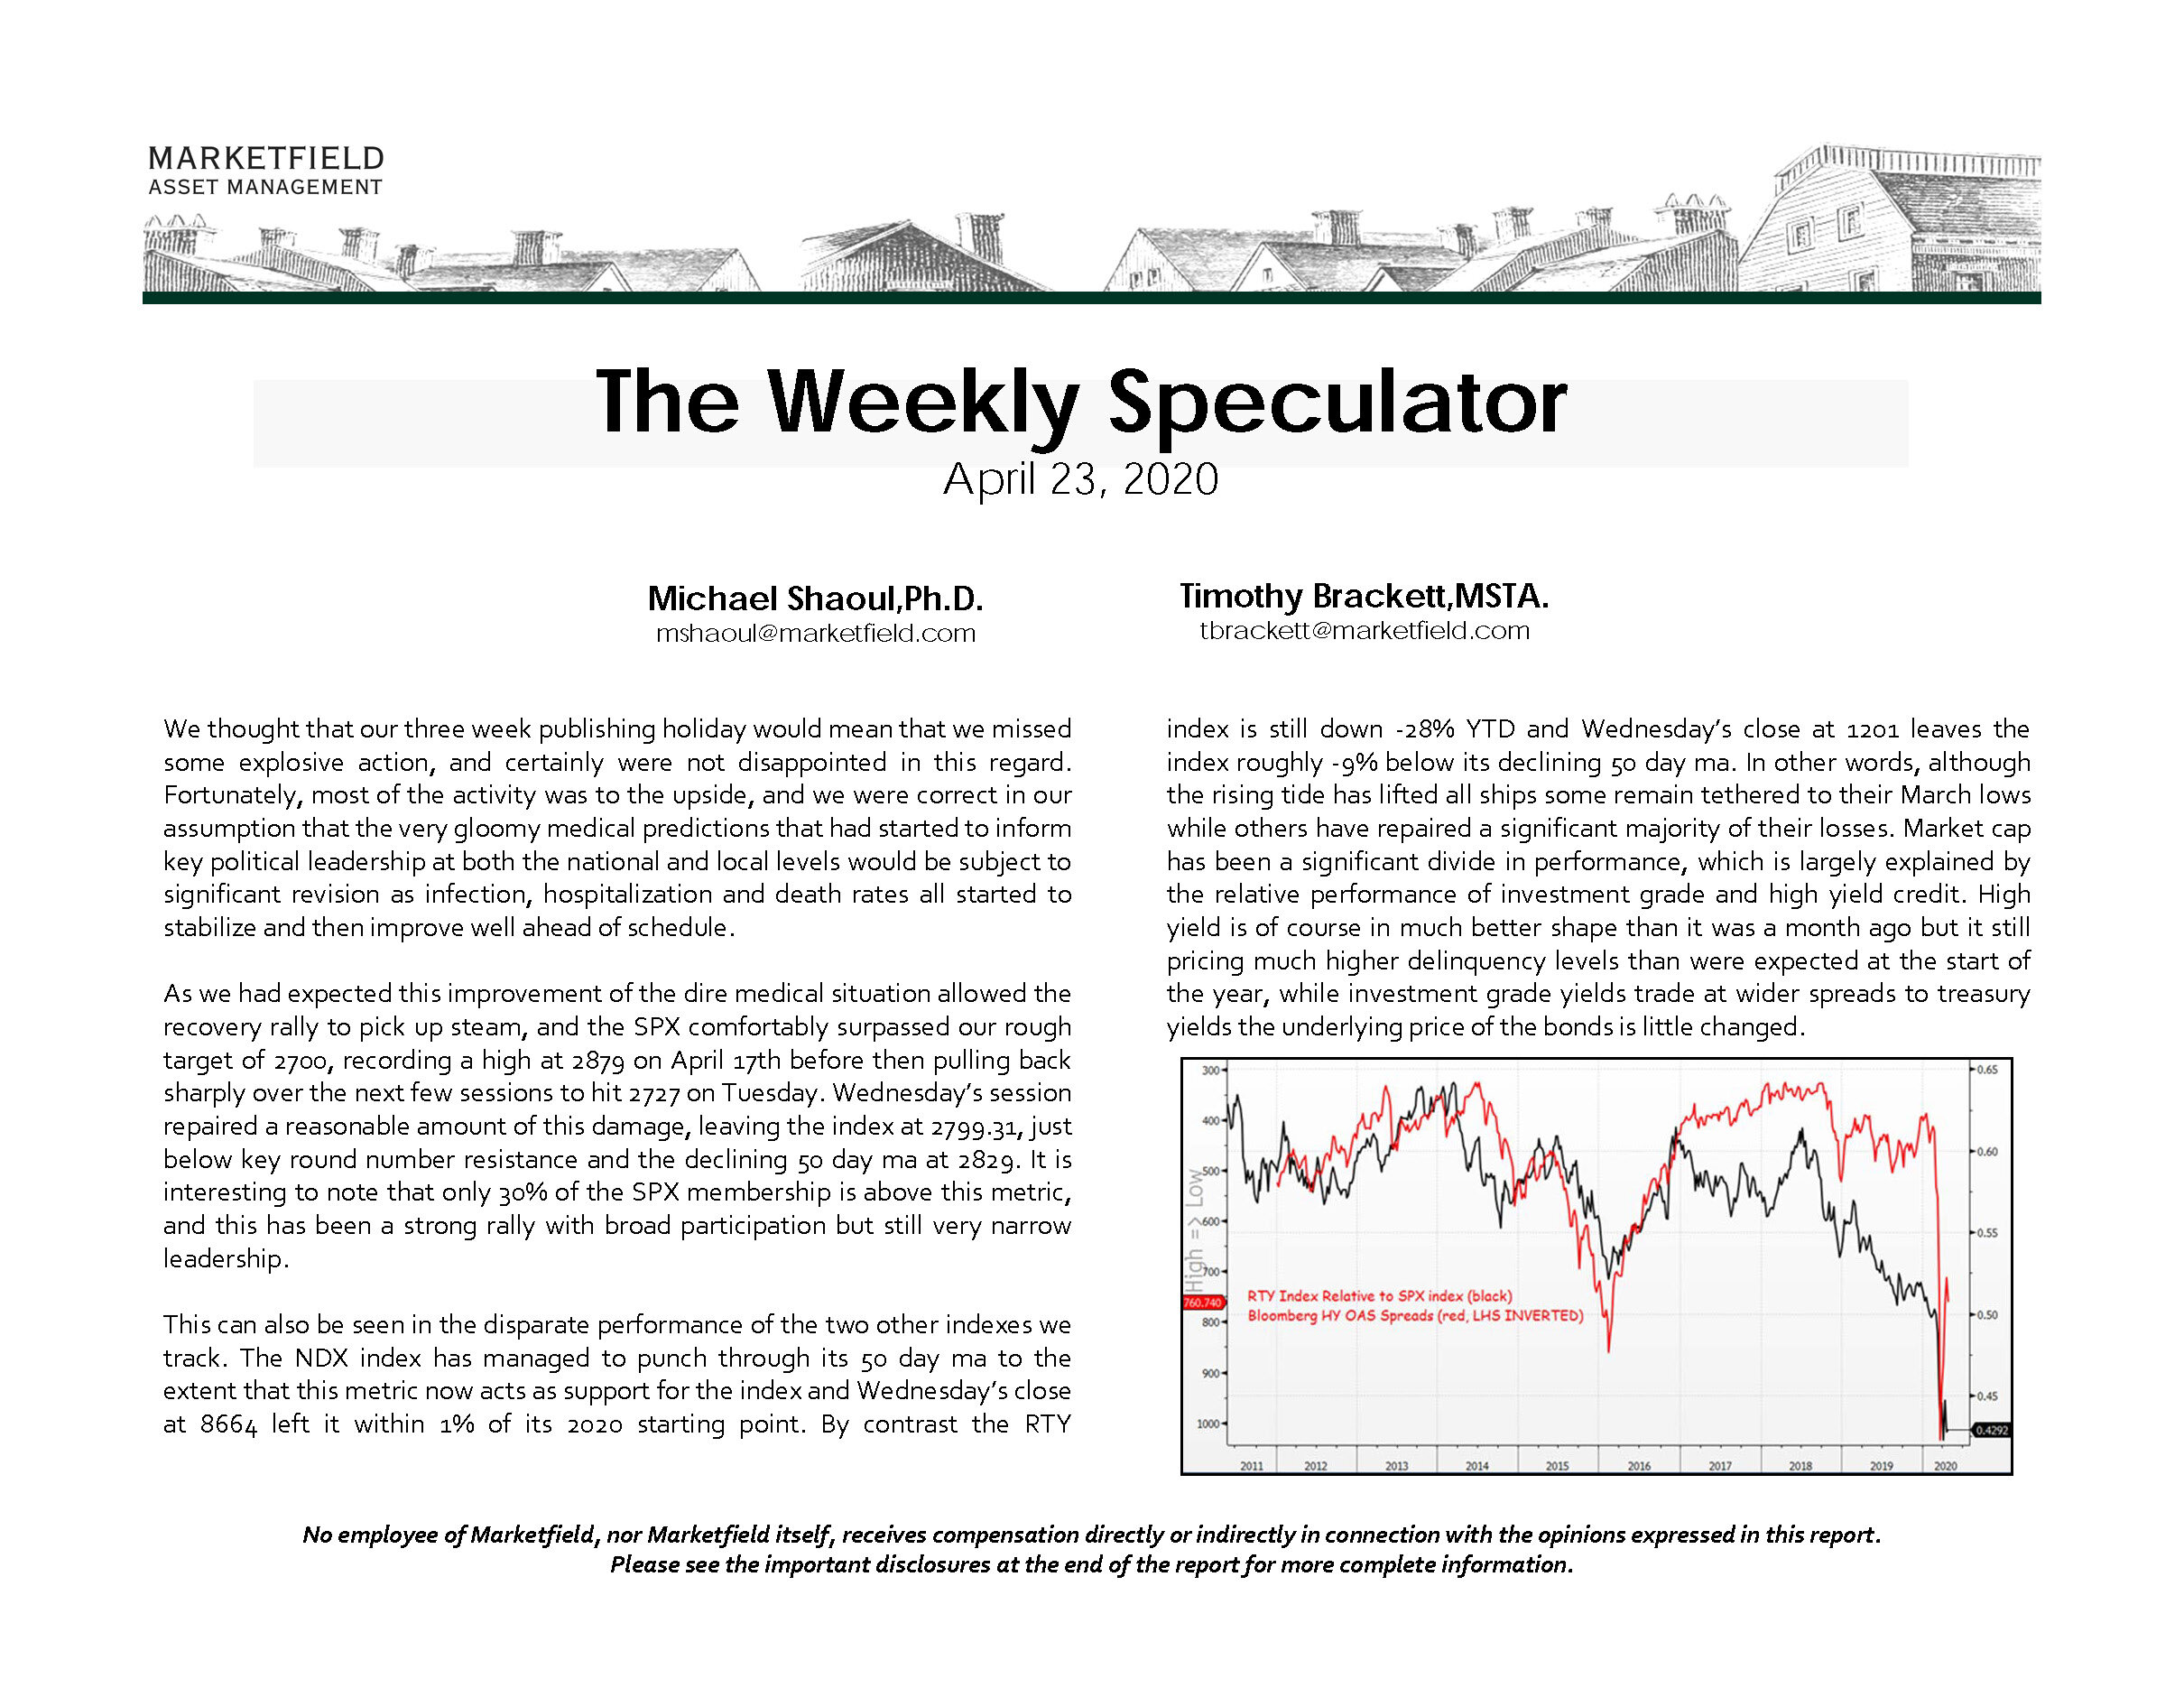 marketfield weekly speculator for 4-23-20_Page_01.jpg